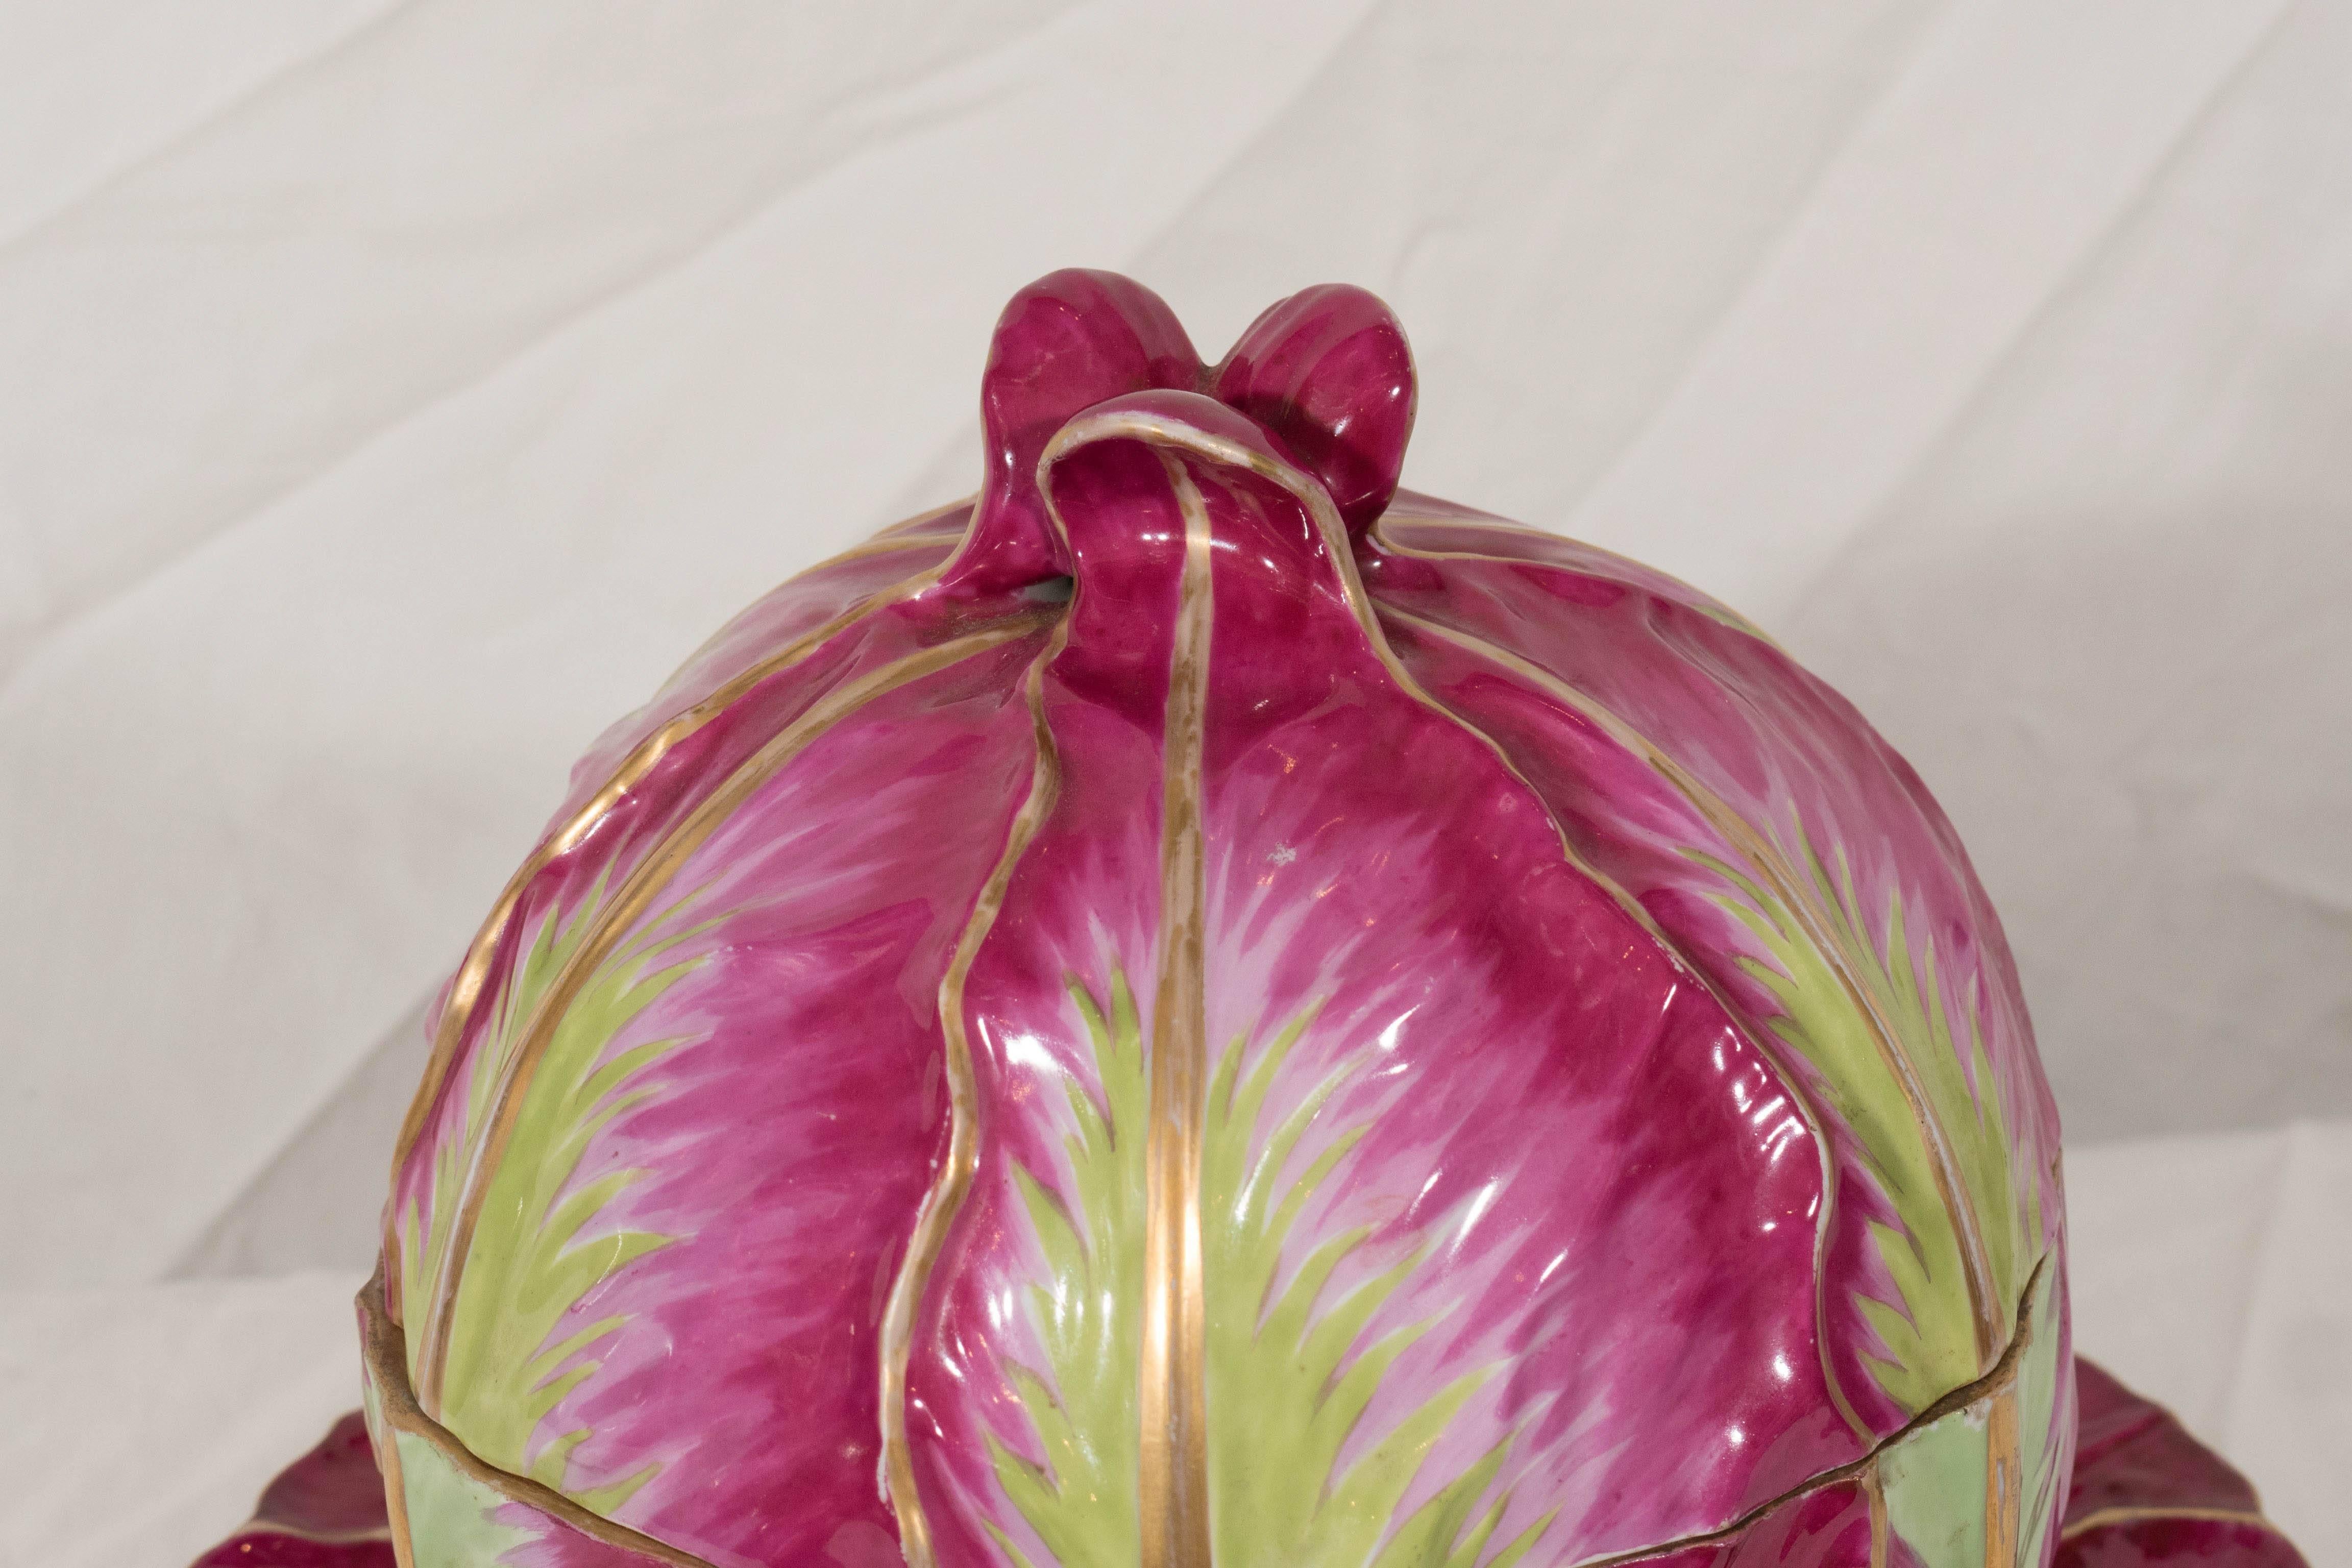 Porcelain Early 19th Century Meissen Cabbage Tureen Painted in Fuchsia and Green